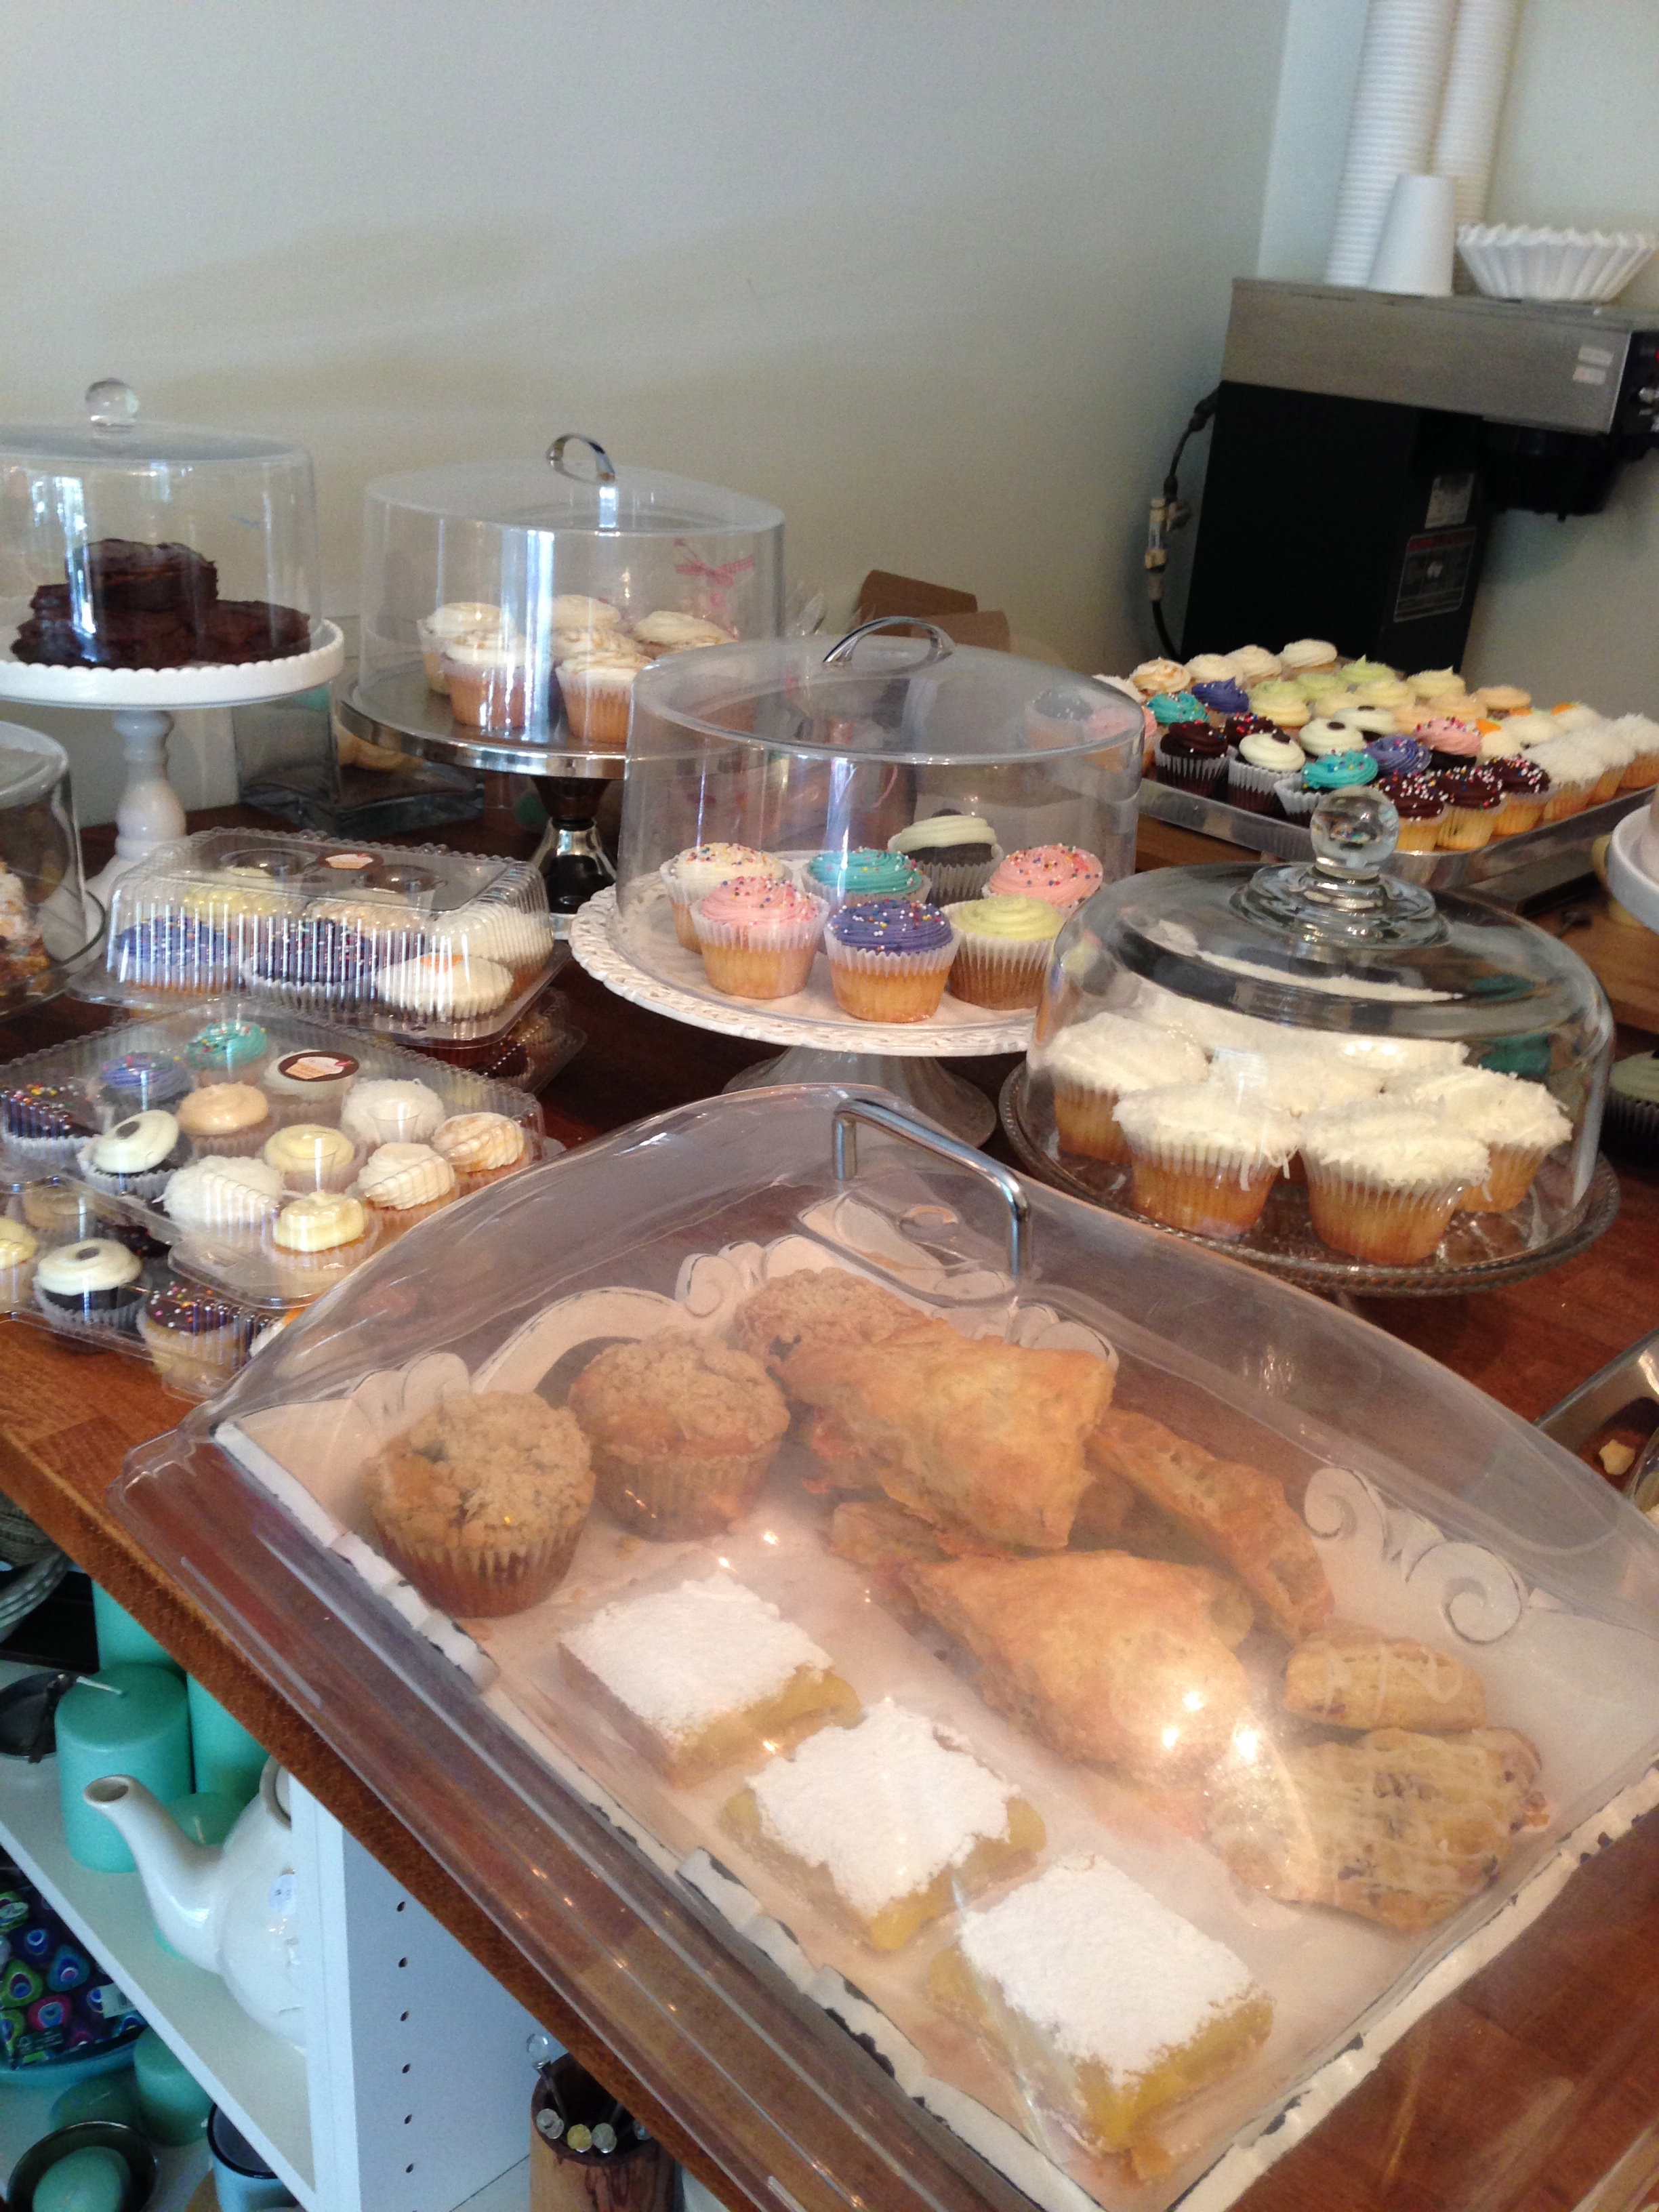 A counter full of delicious baked goods.